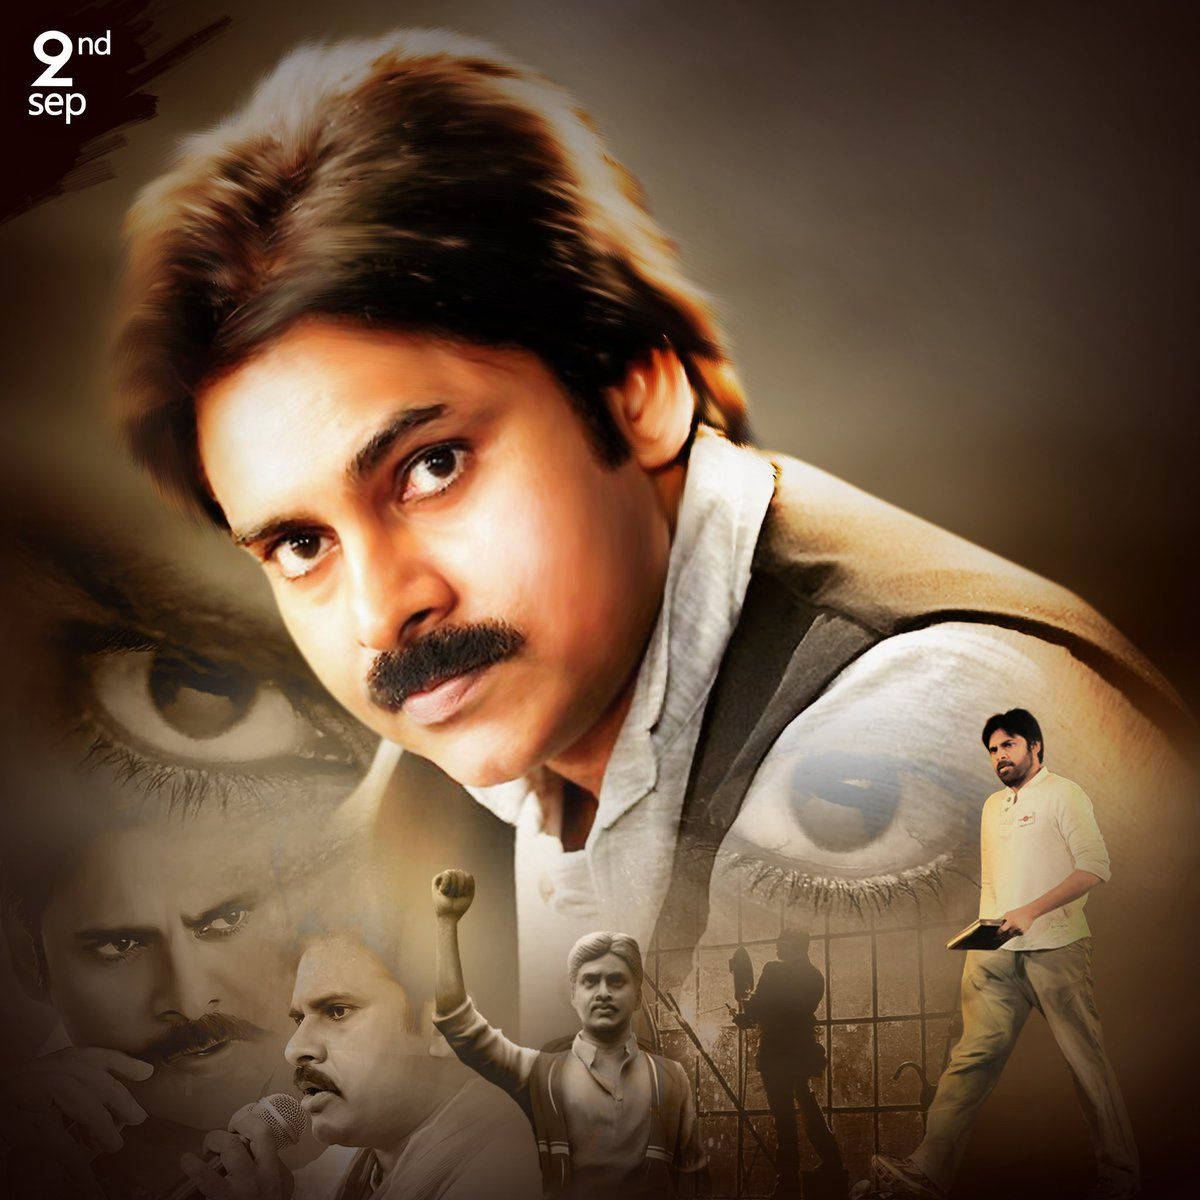 Pspk Collage Of Photos And Statues Background